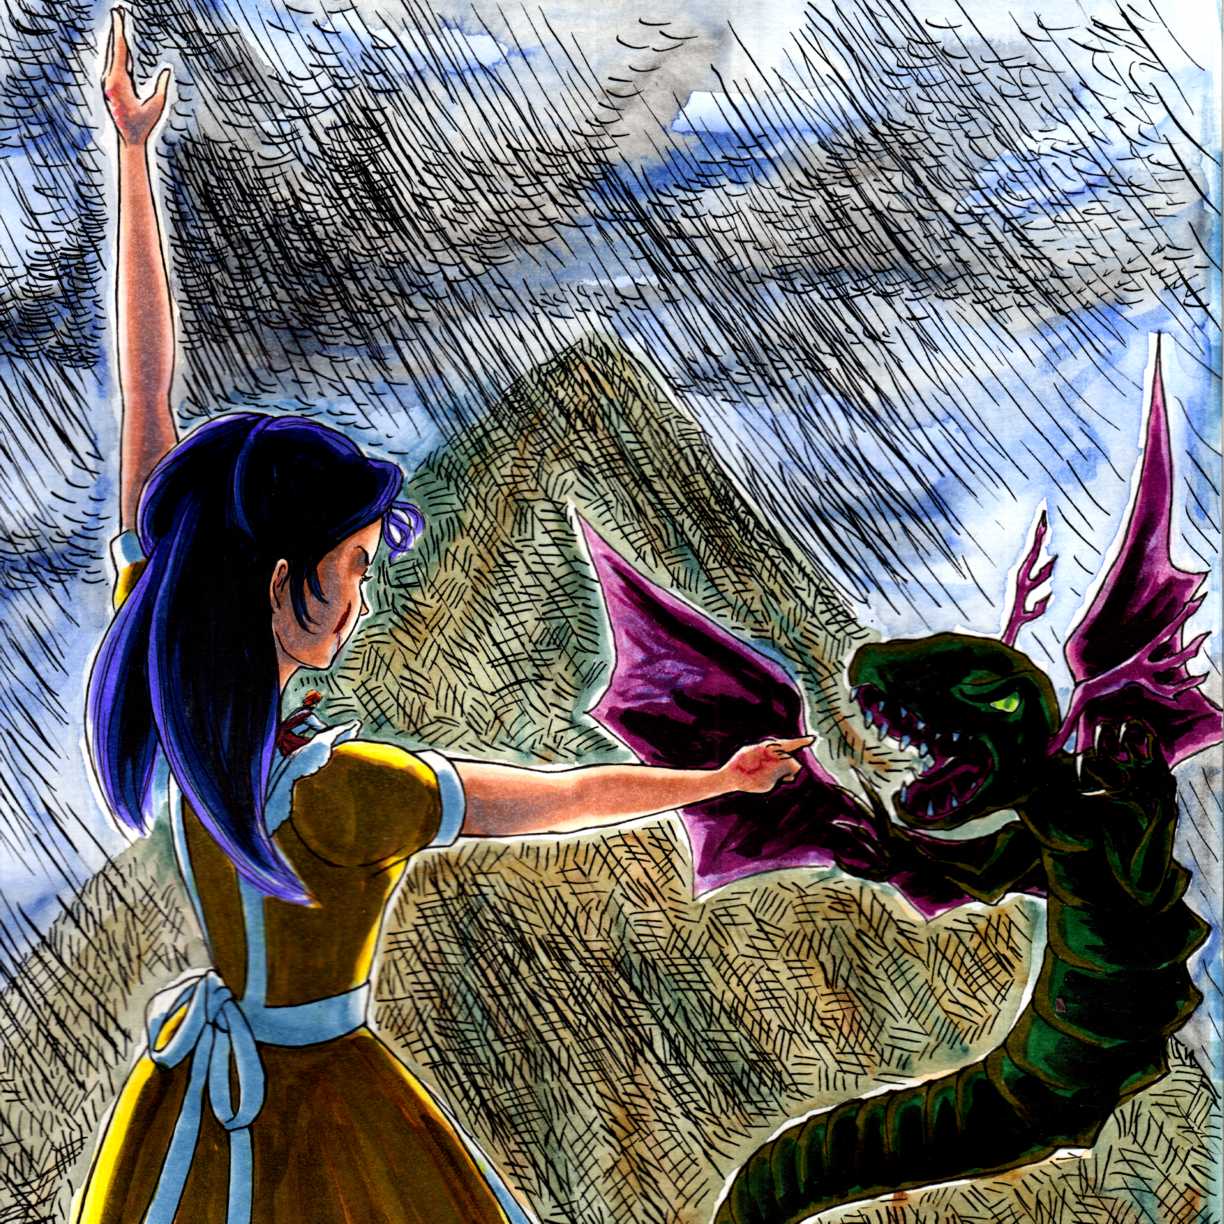 Dragon of the Depths vs Girl a mile high 5 episode cover